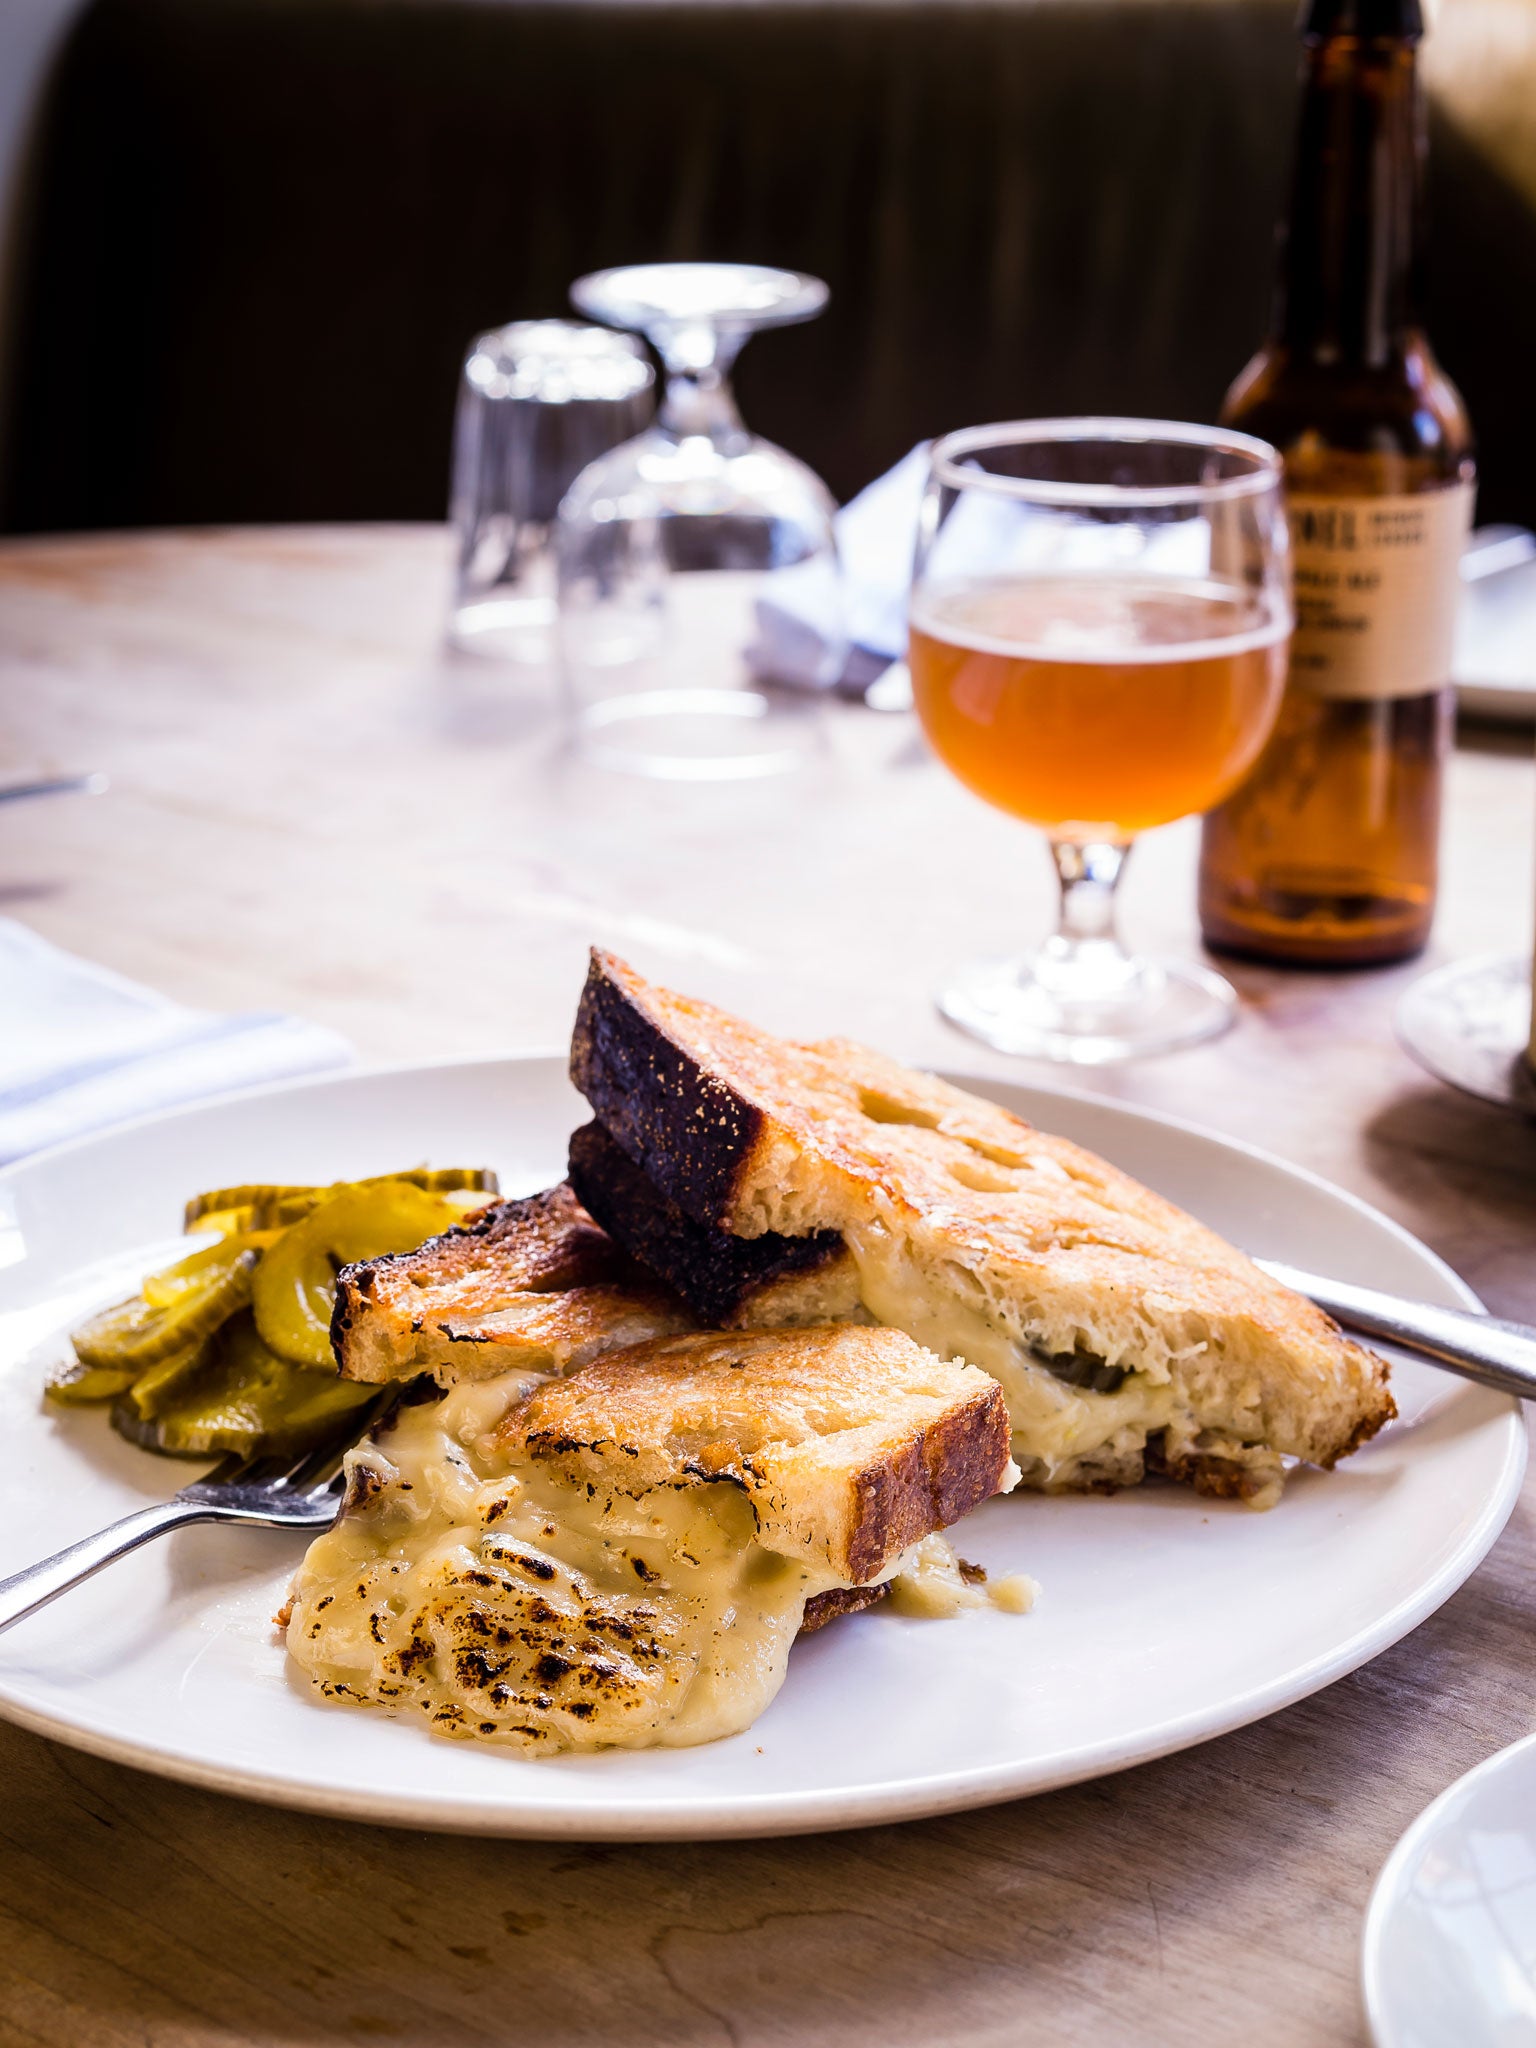 Grilled beer cheese sandwich with bread-and-butter pickles